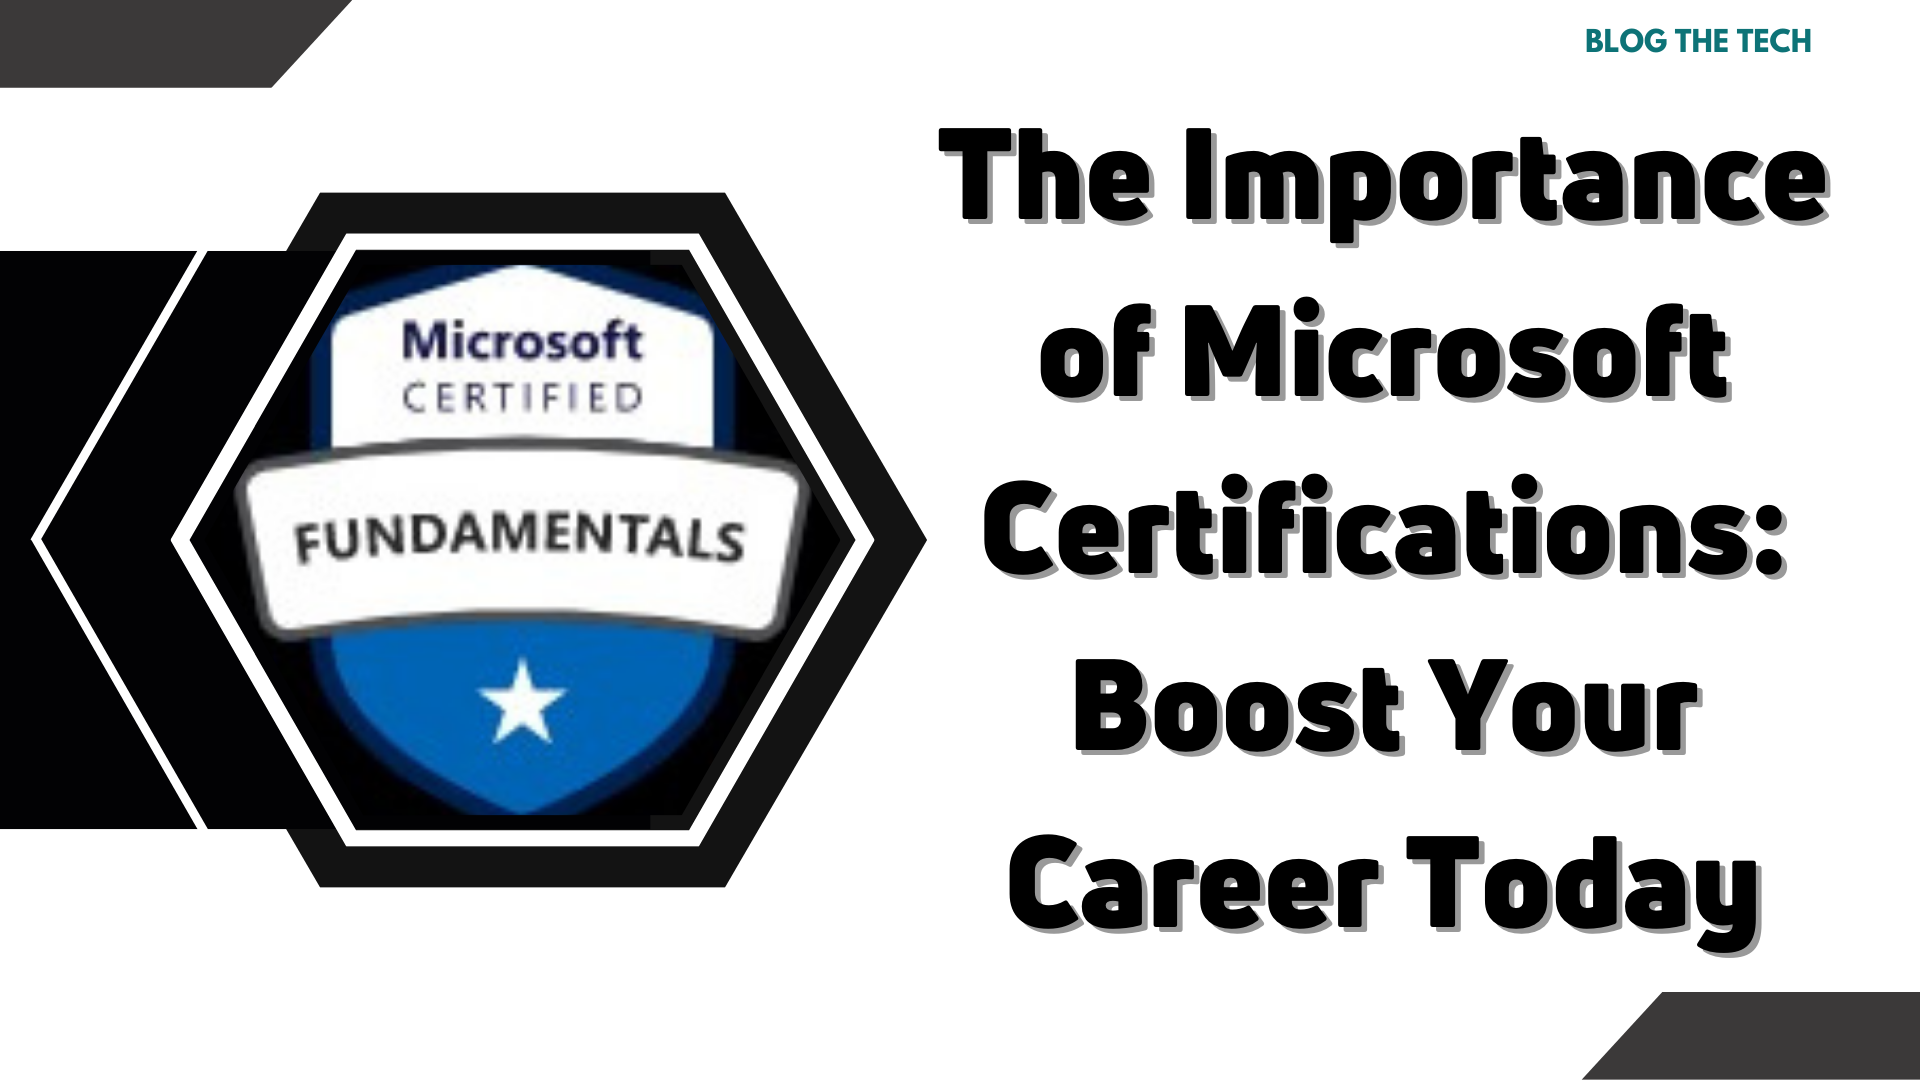 The Importance of Microsoft Certifications: Boost Your Career Today